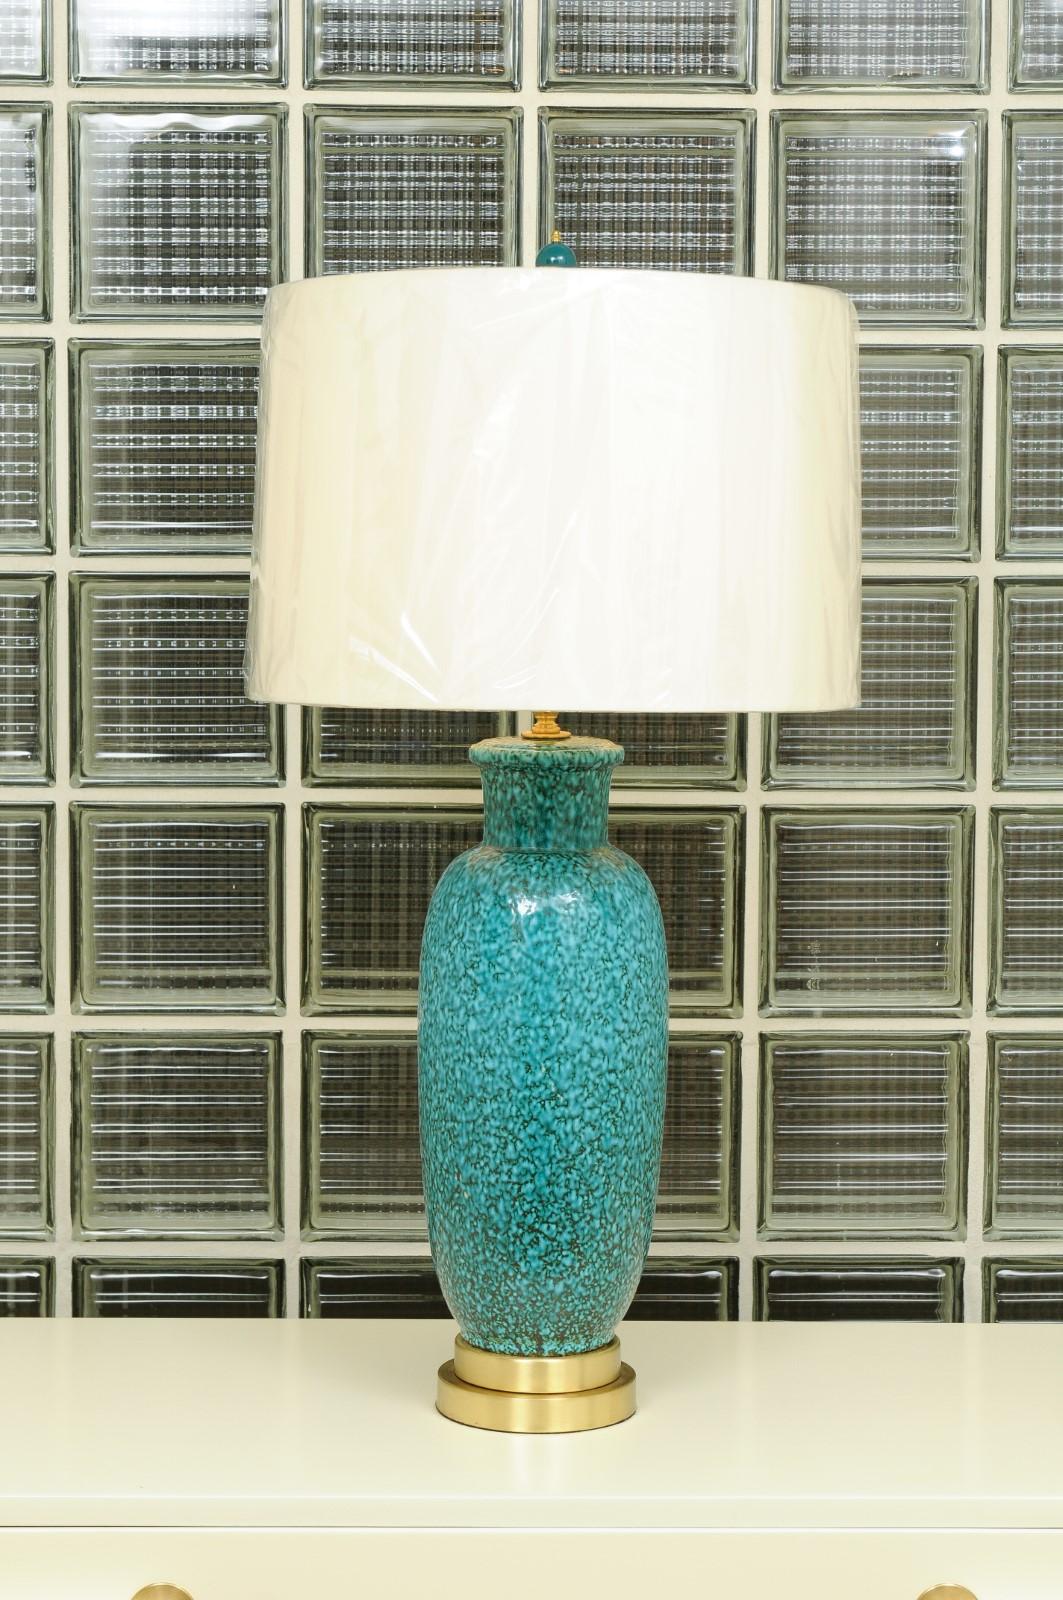 These magnificent lamps have been professionally restored and are shipped as photographed and described, complete with new shades, harps and finials.

A fabulous pair of large-scale vintage ceramic and brass lamps, circa 1960. The Turquoise color